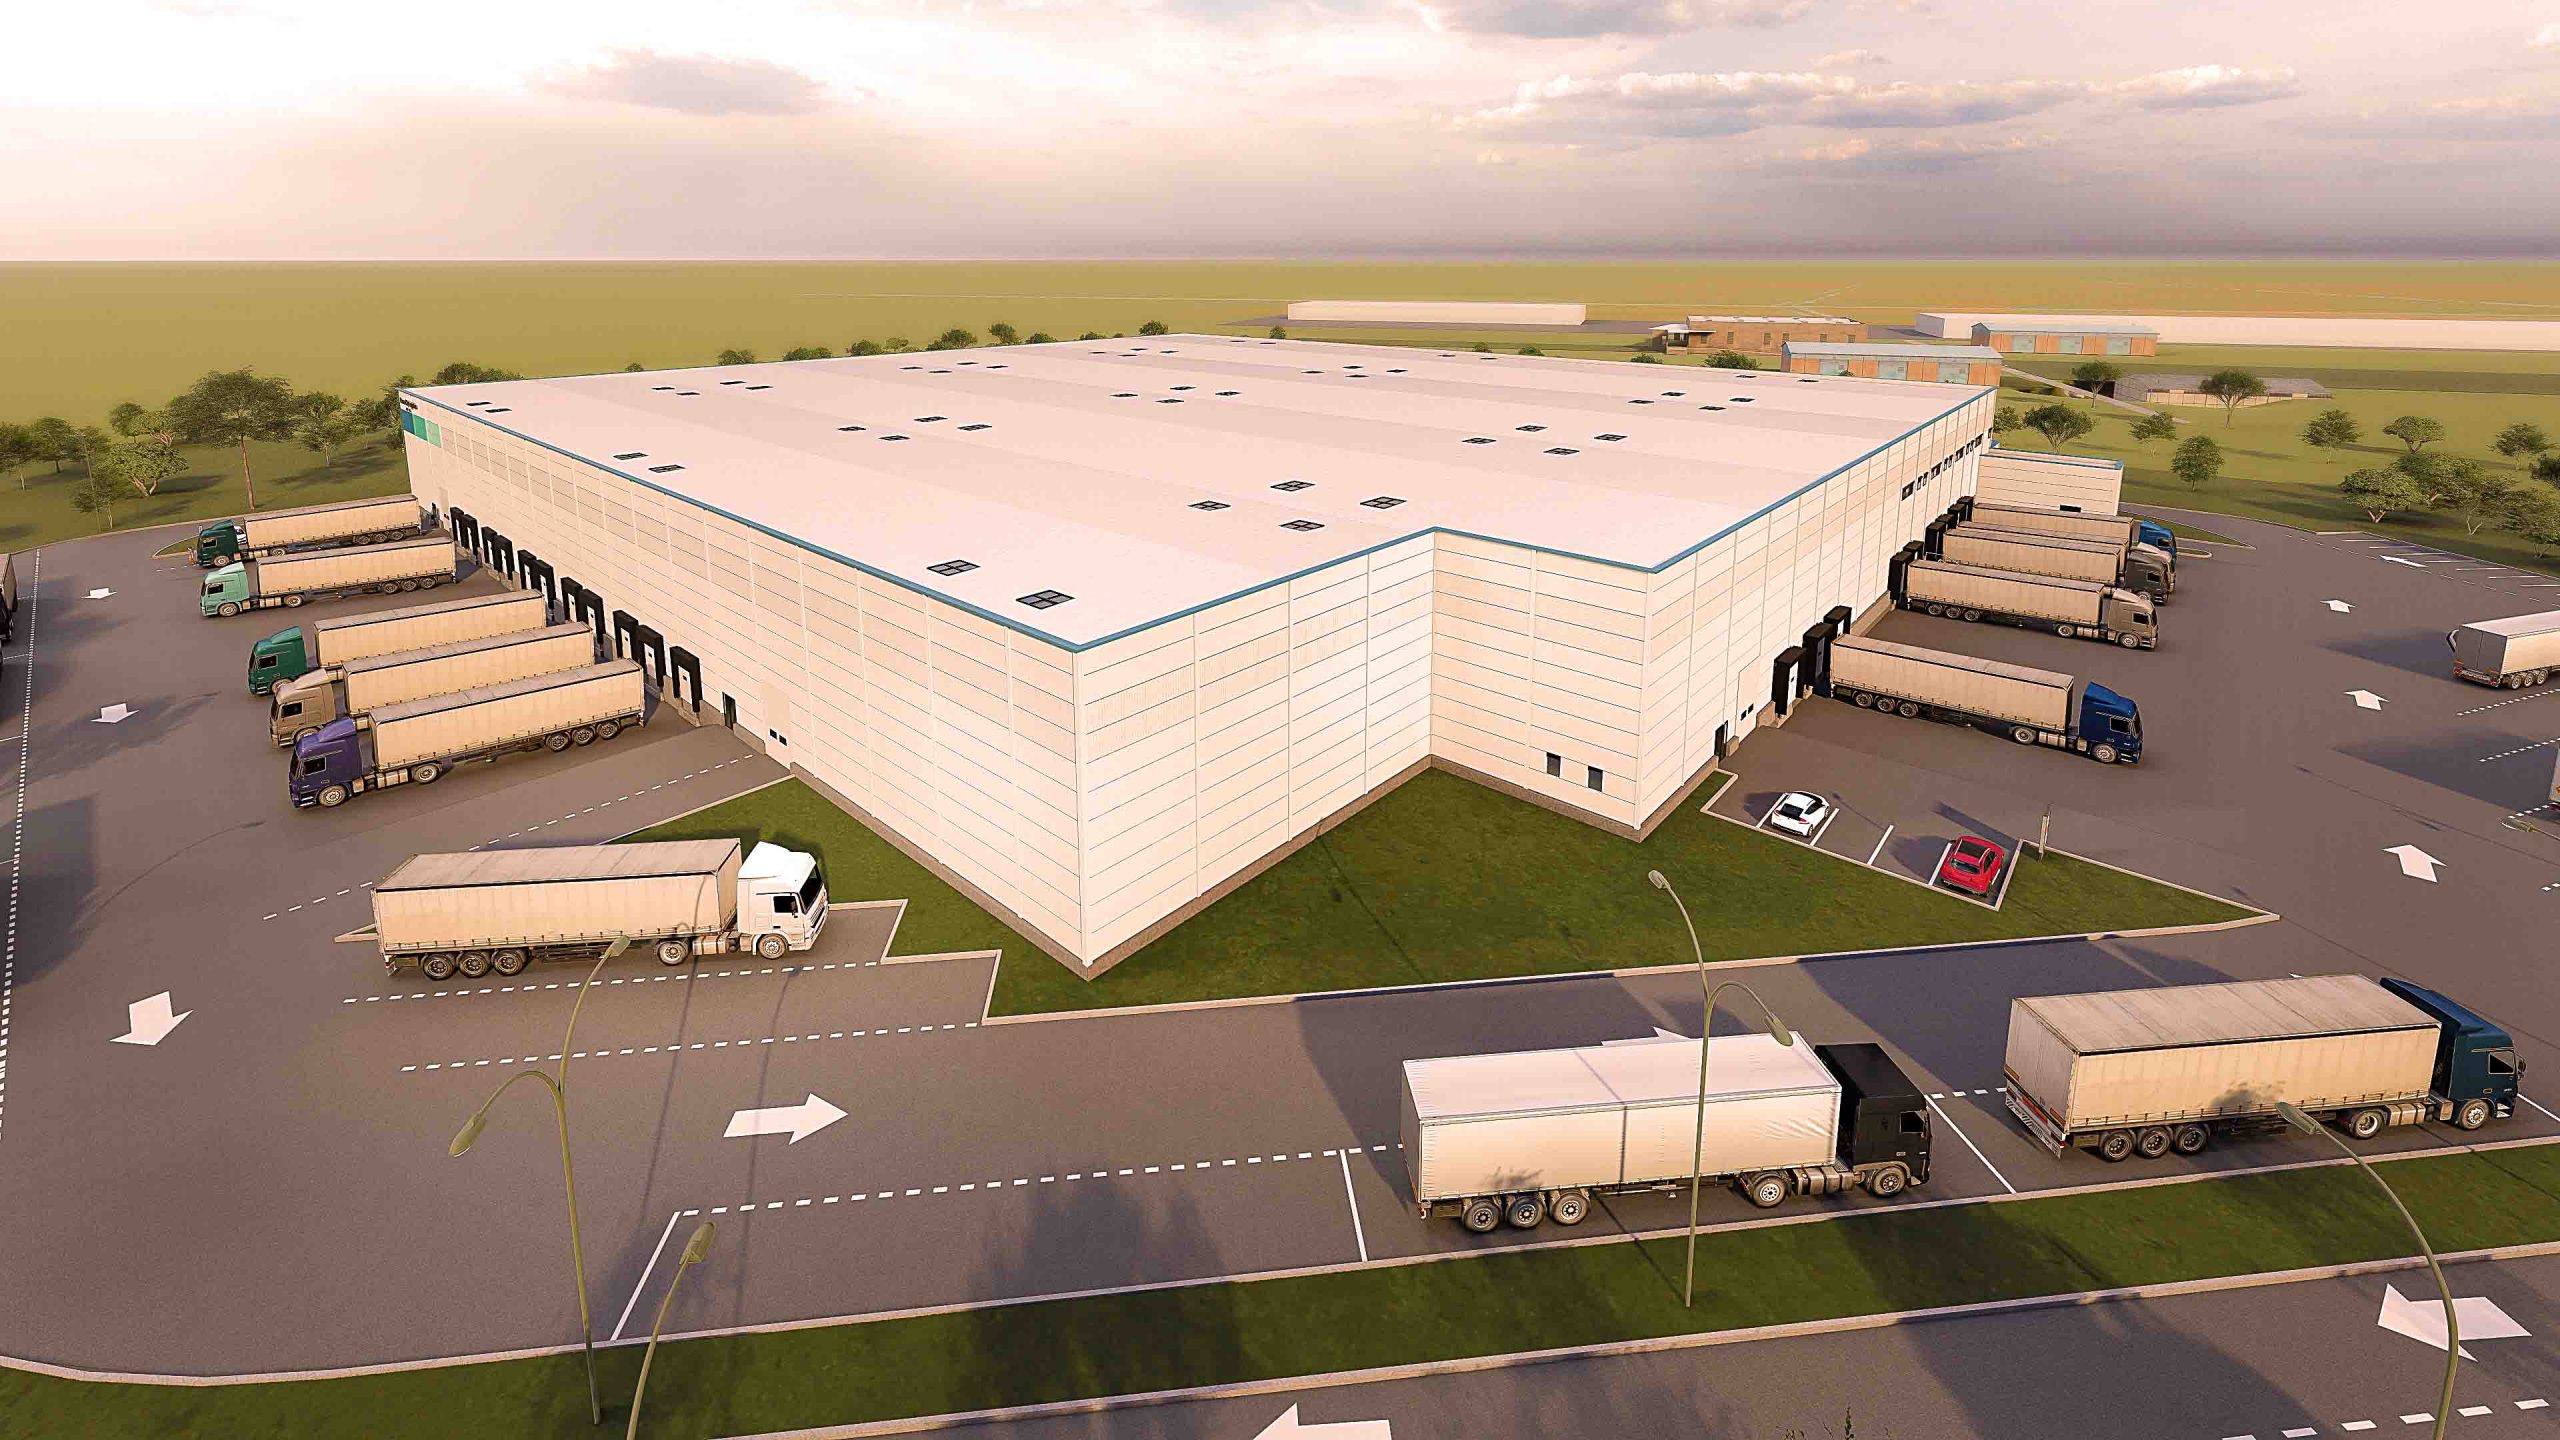 Global Vision expands its logistics and industrial activity in Târgu Mureș